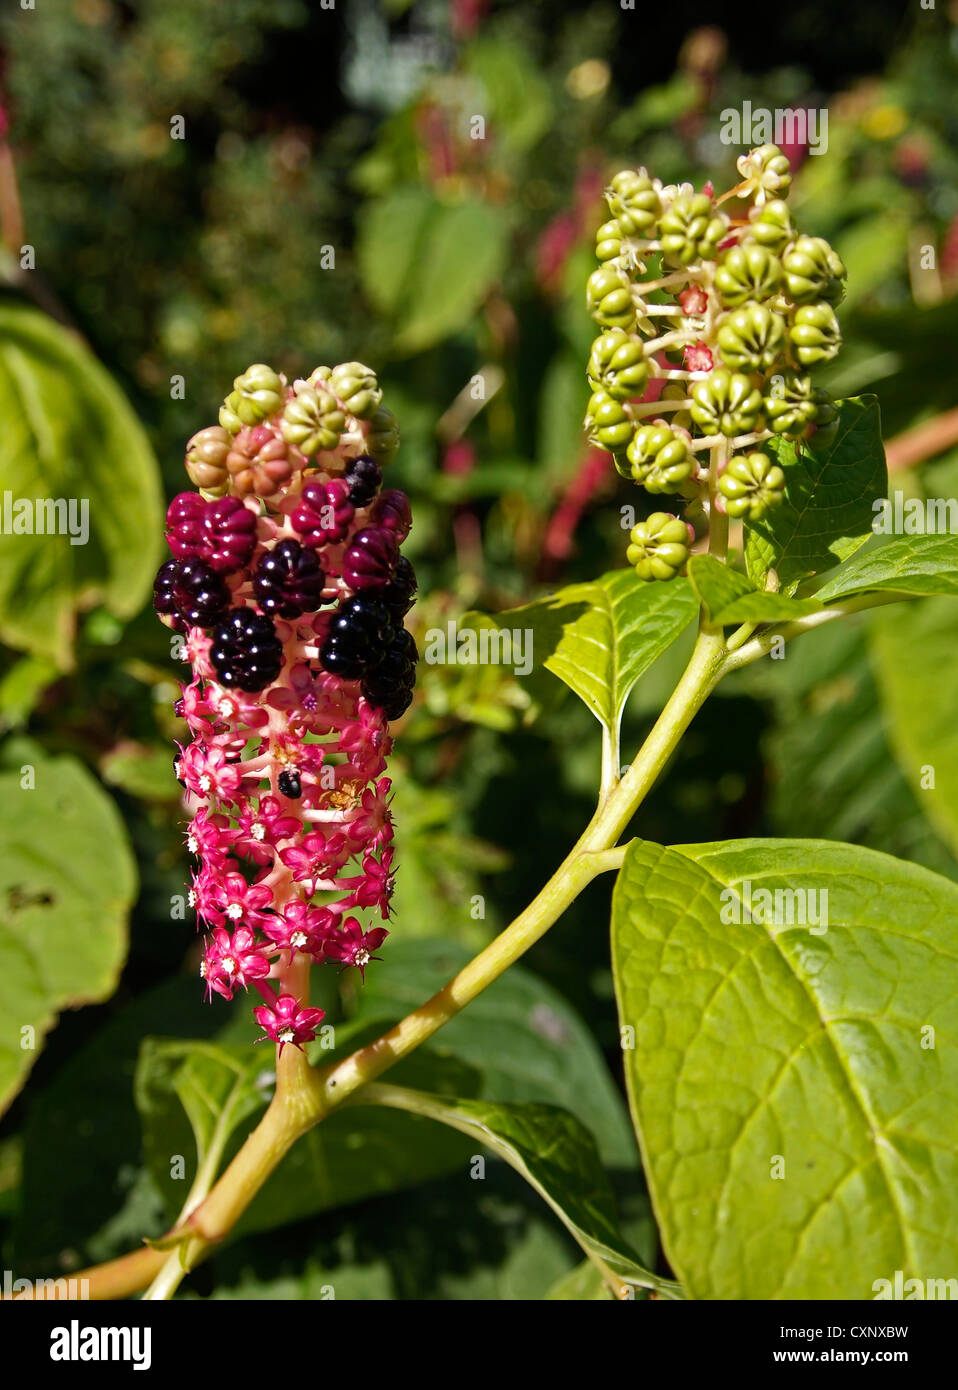 Clethra alnifolia Ruby Spice flowers and developing seed heads Stock Photo